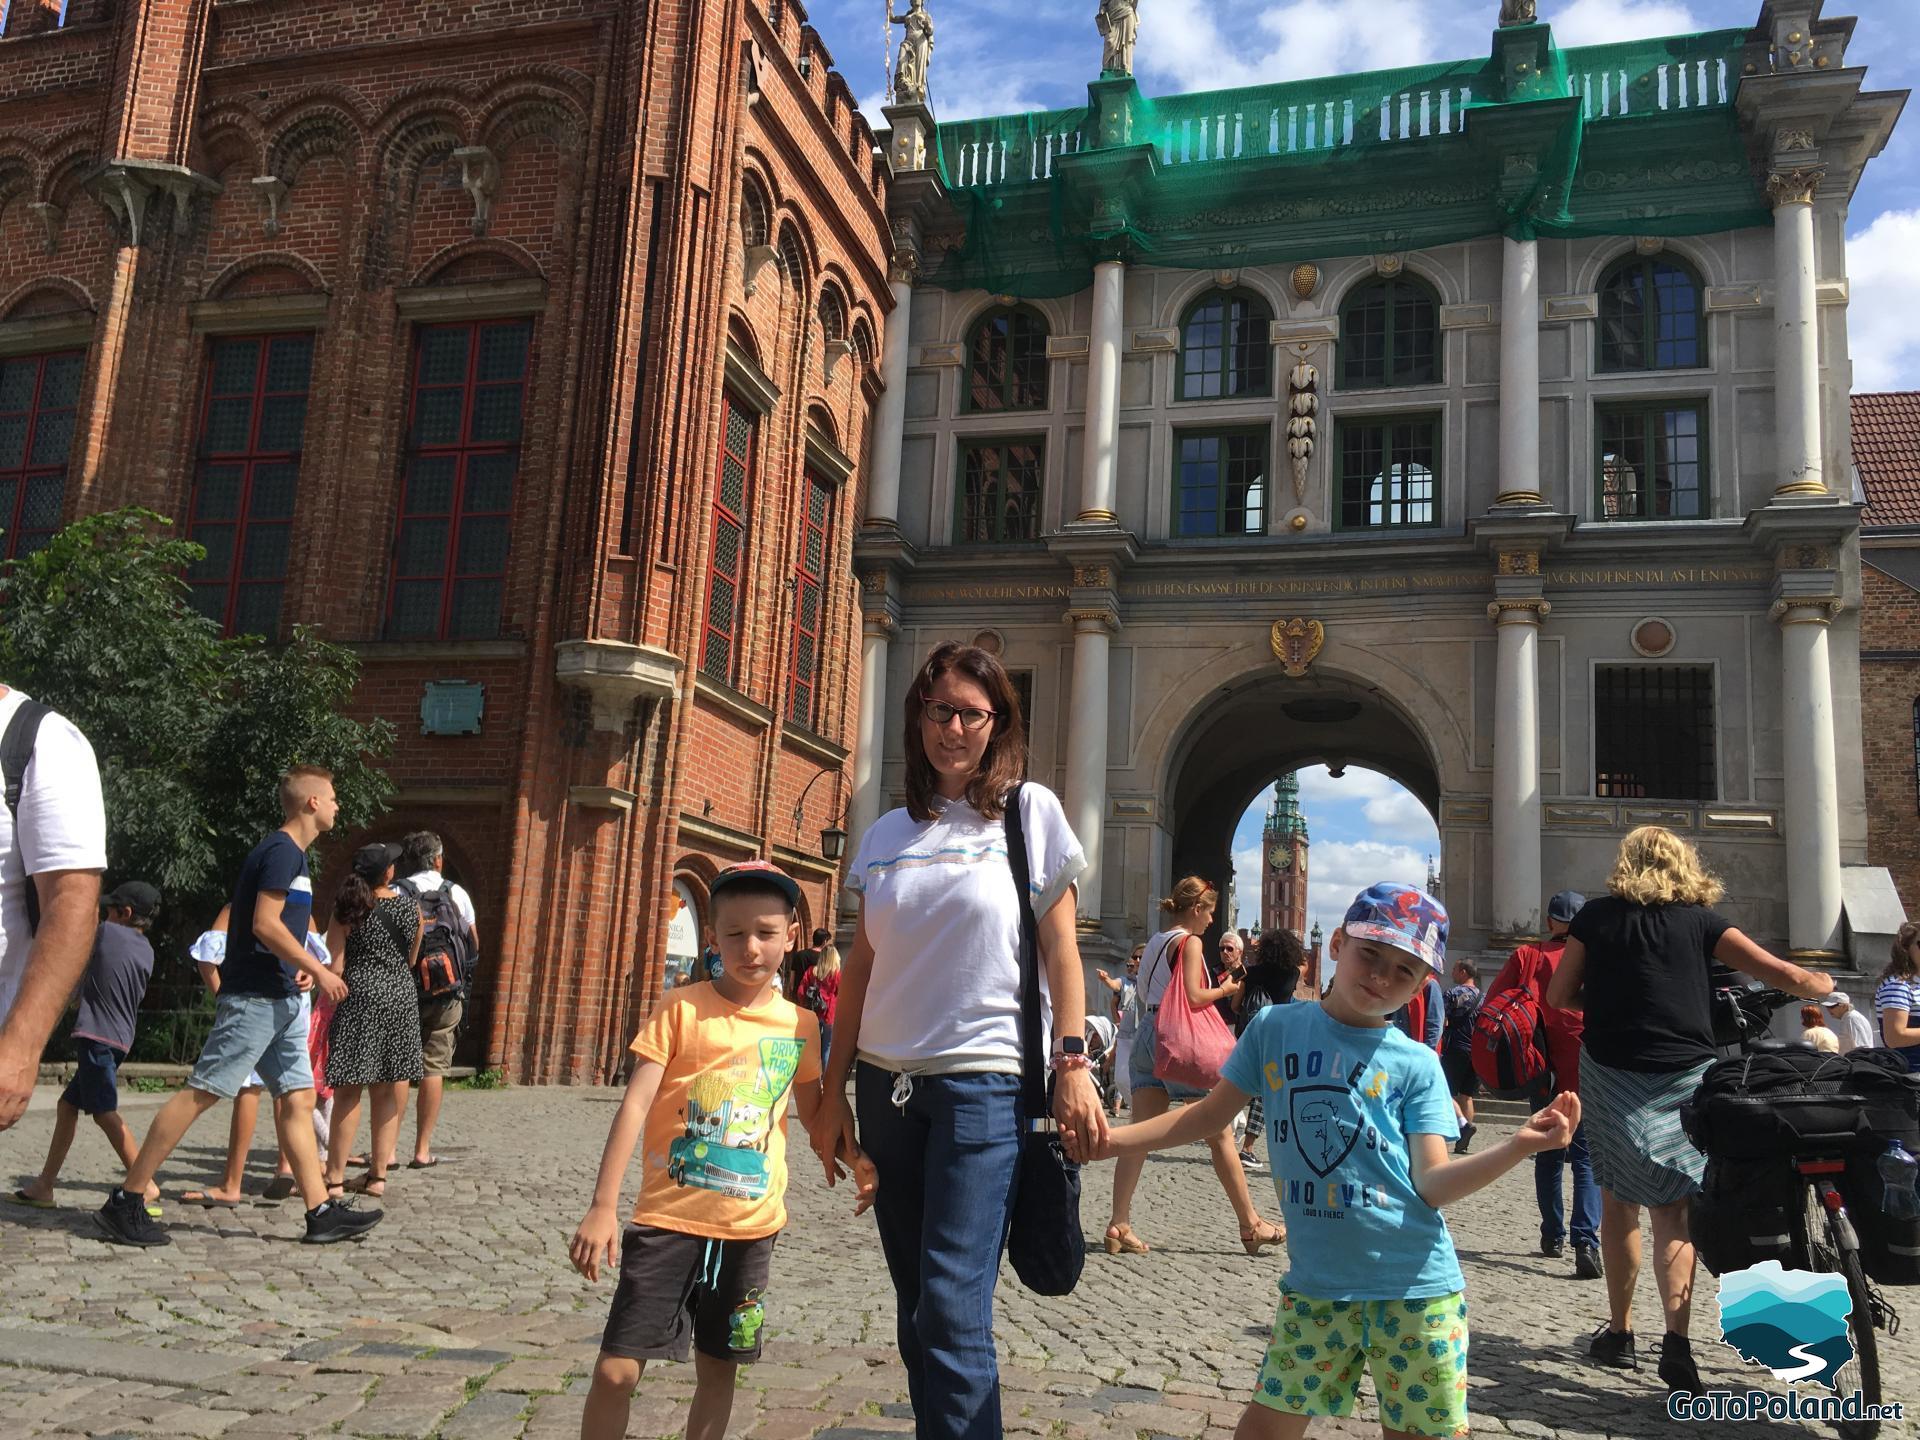 a woman with two children are standing by a red brick building, this building is next to a light colored gate with greek style columns, many tourists are around them